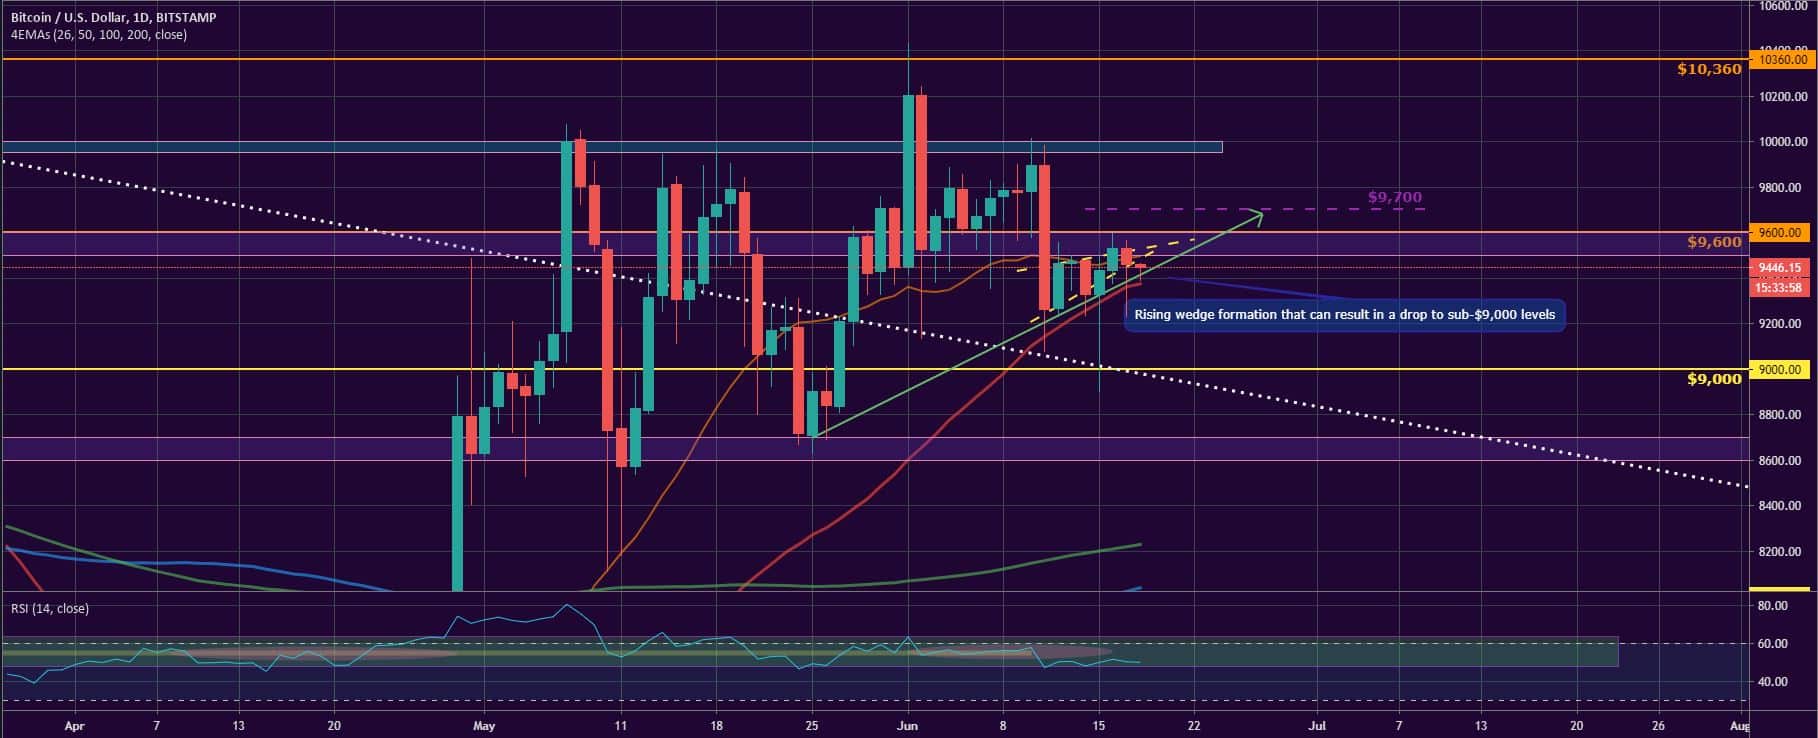 Bitcoin and Ether Market Update June 18, 2020 - 1